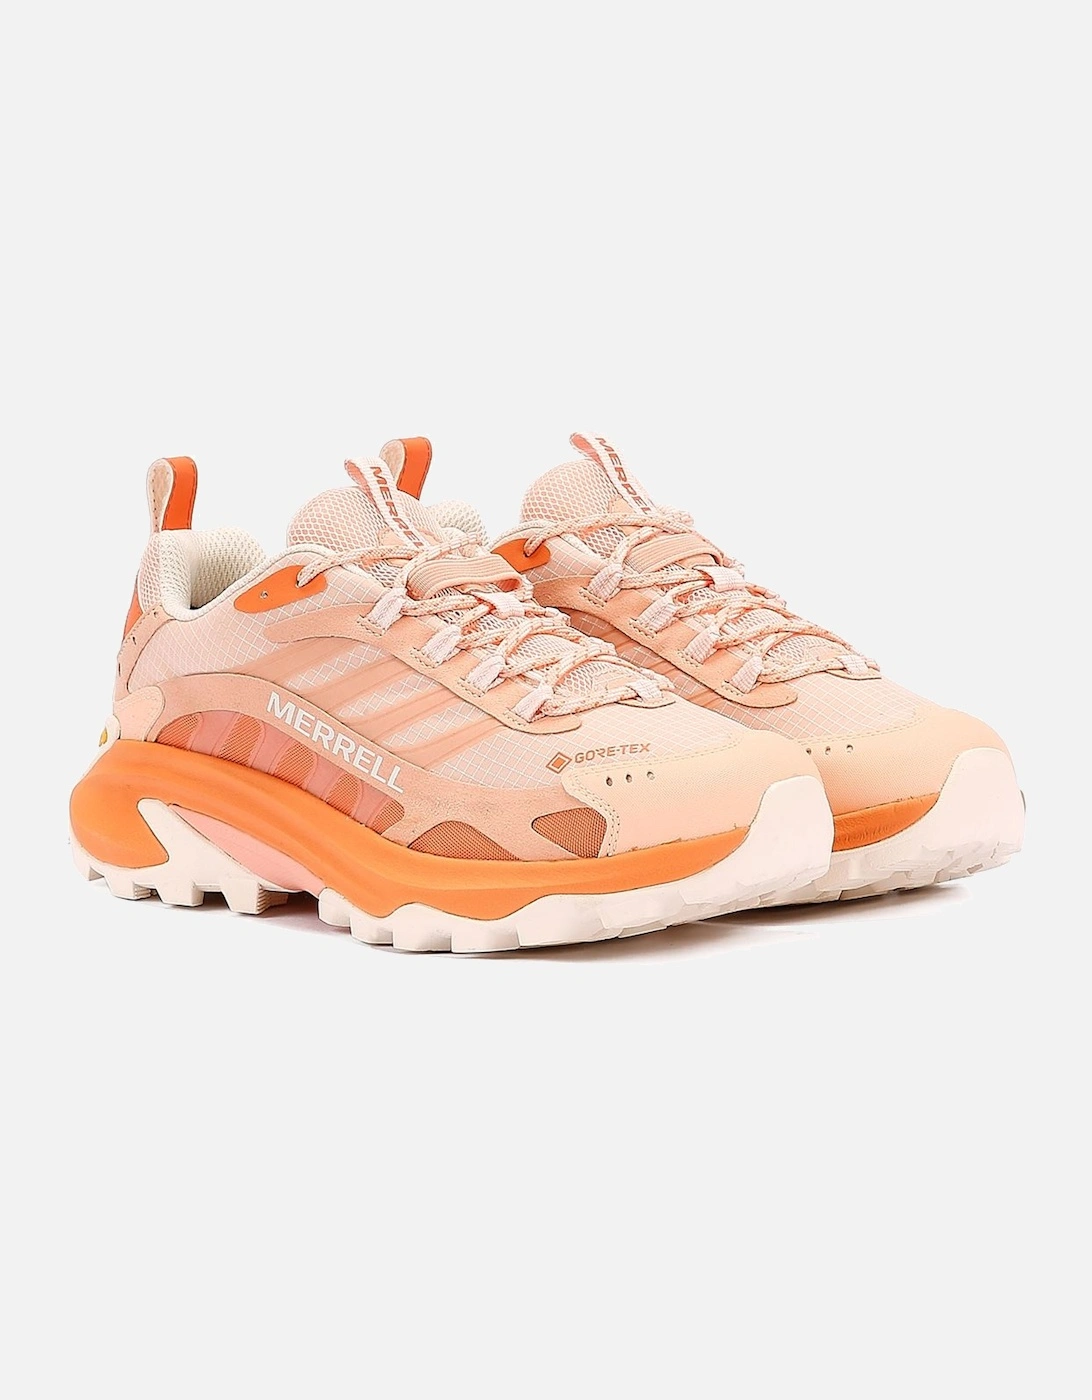 Moab Speed 2 Gore-Tex Women's Coyote Peach Trainers, 9 of 8